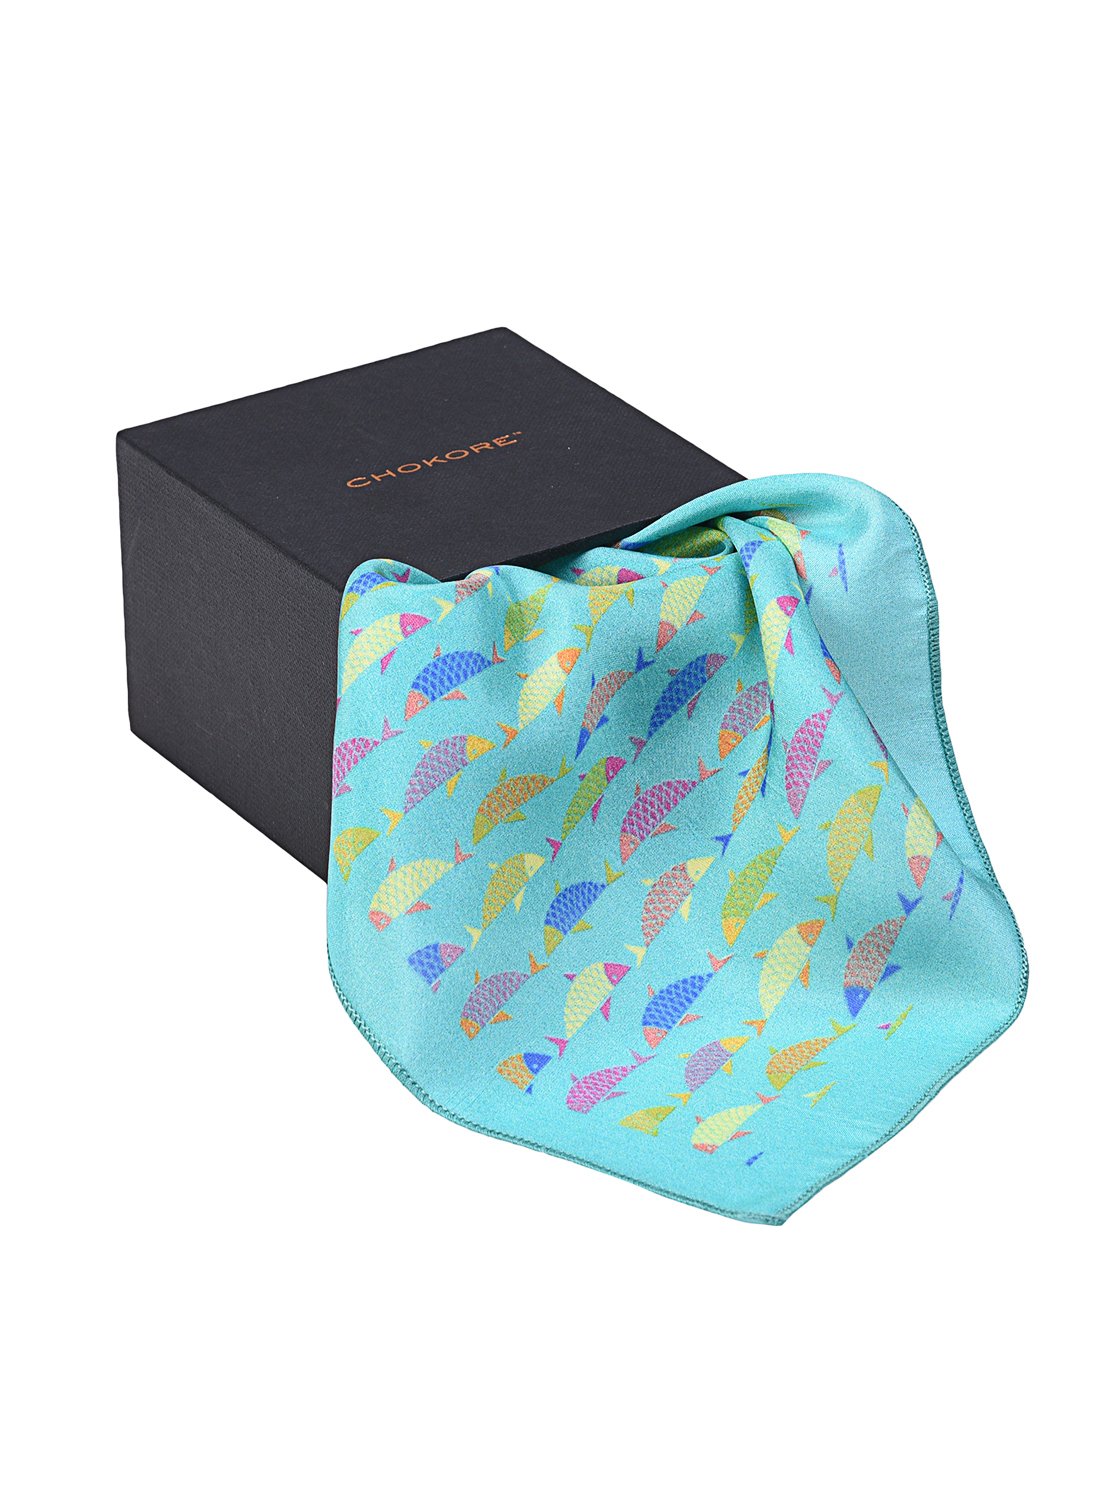 Chokore Multi-coloured Fishes Silk Pocket Square from the Wildlife range